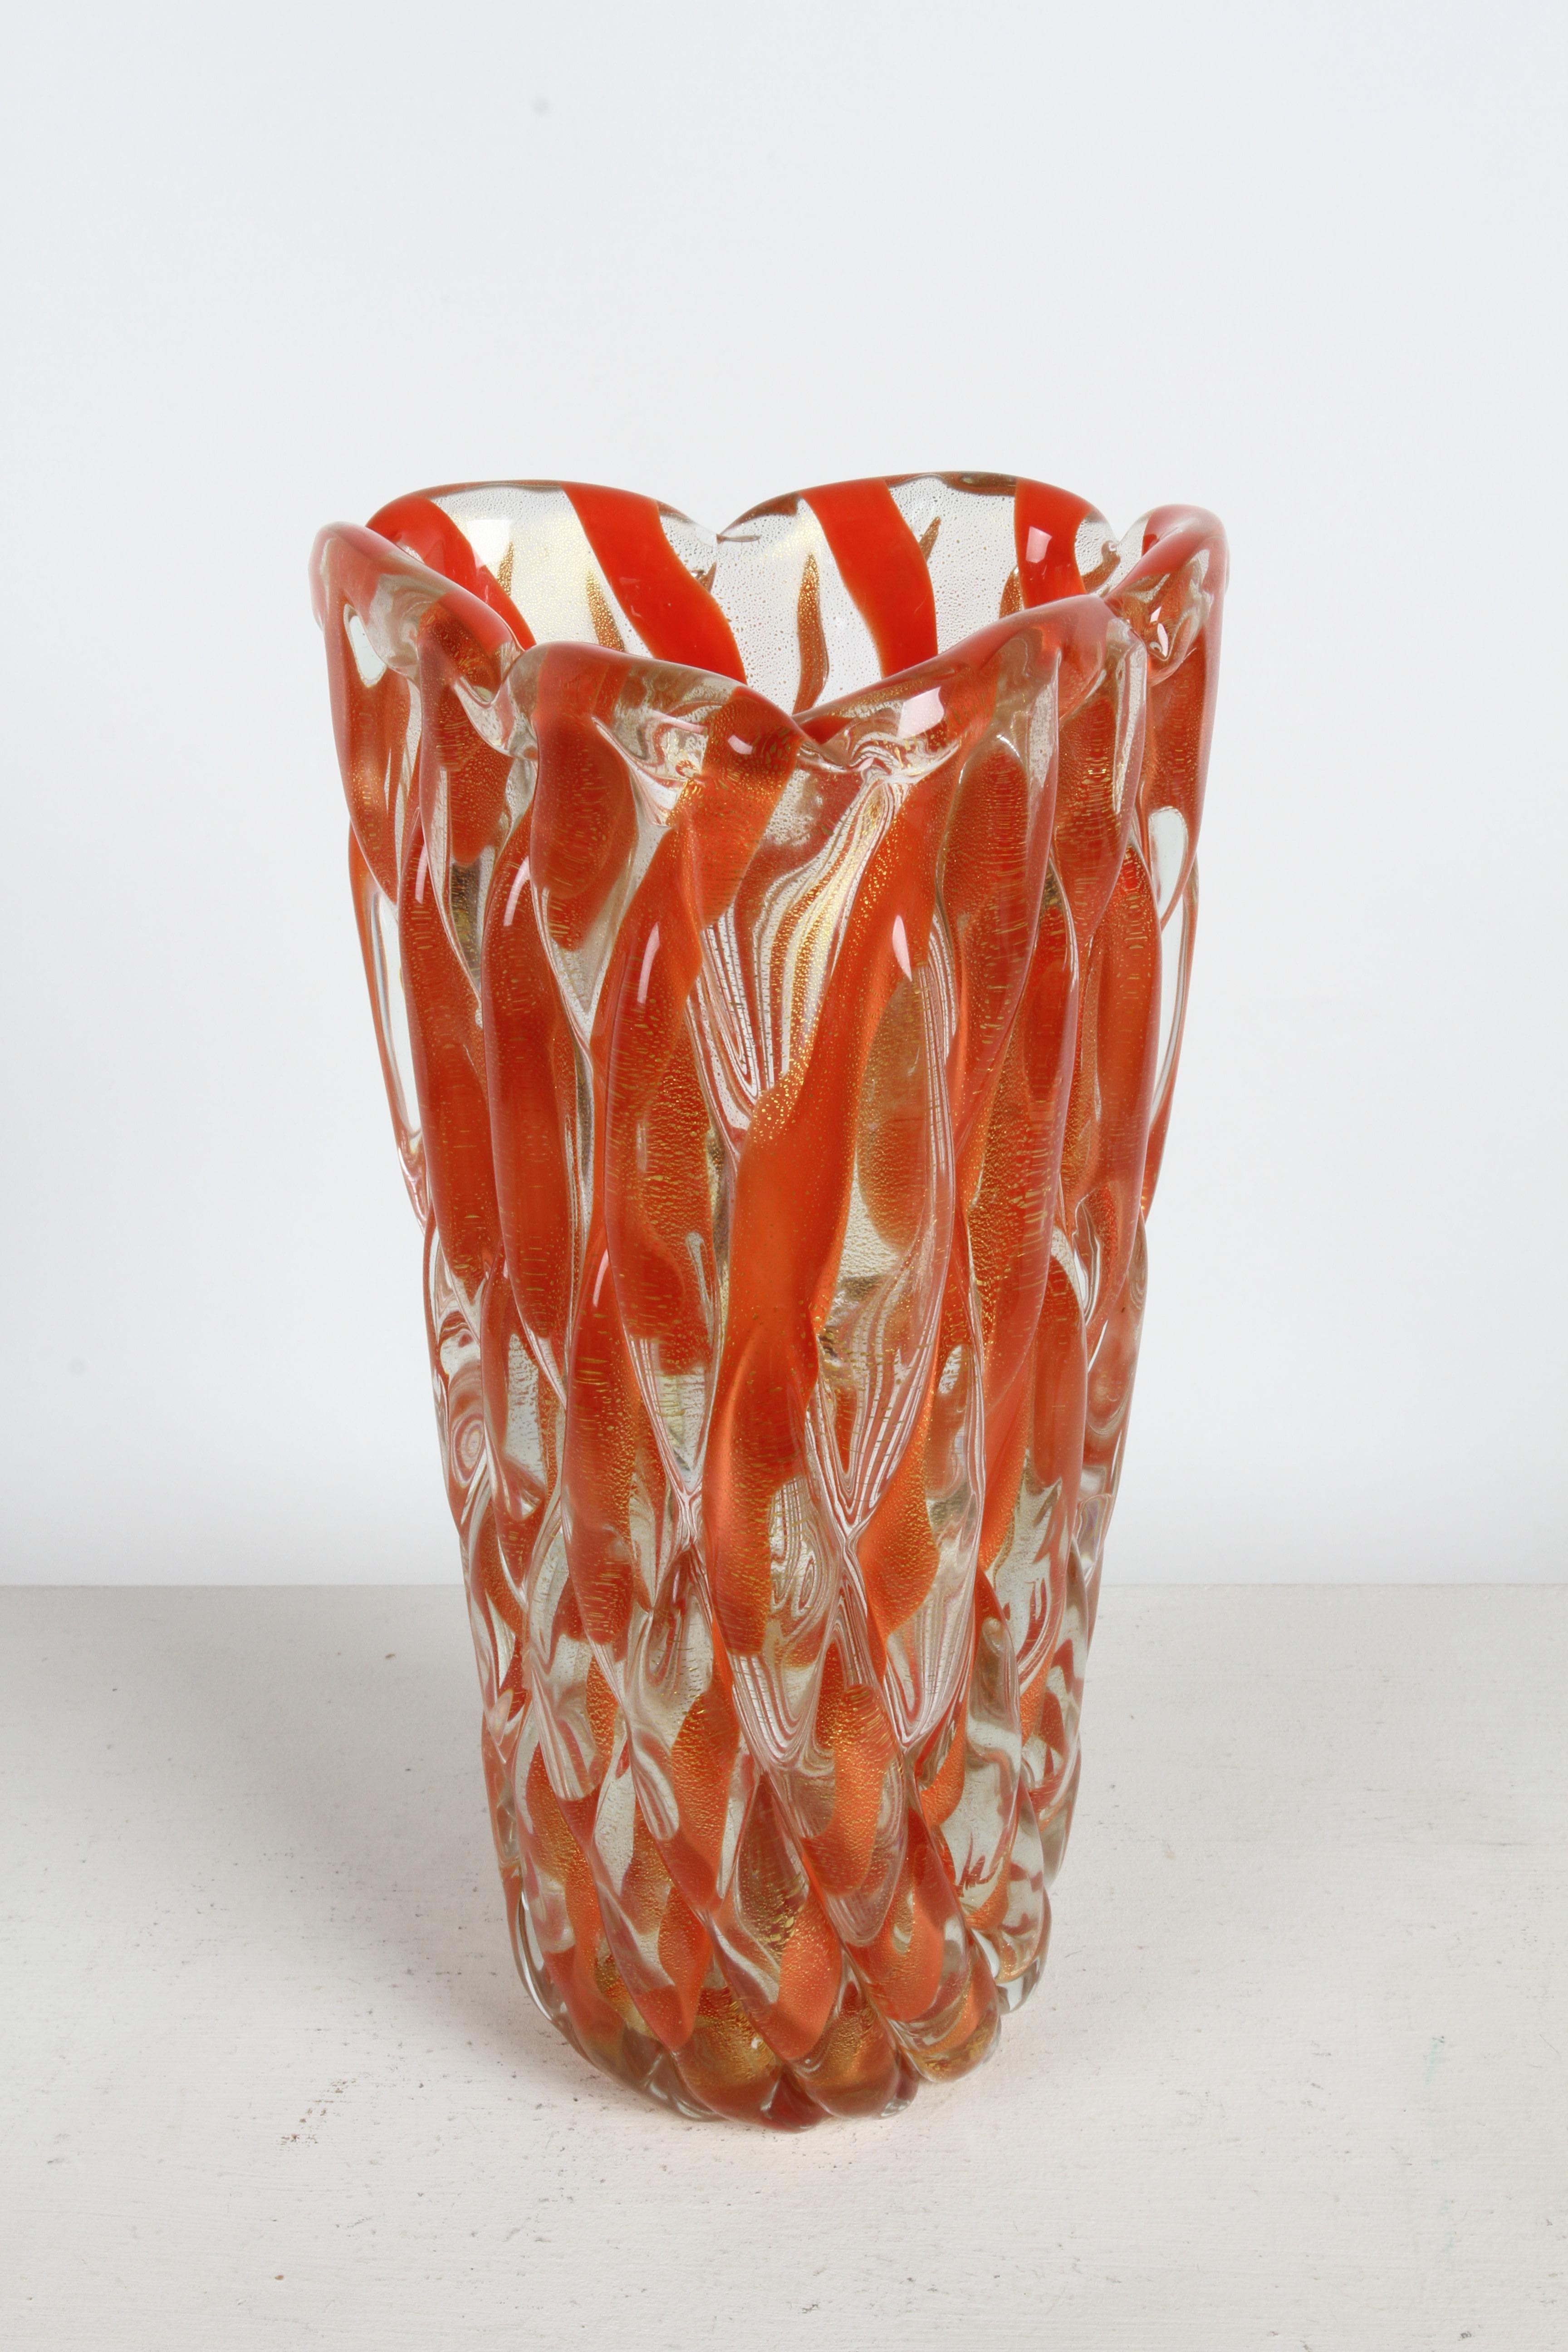 A large and heavy Mid-Century Modern hand-blown Murano art glass vase designed by Alfredo Barbini (1912-2007), circa 1950s. Tall triangular form with thick twisted ribbed glass of coral / orange striped glass with gold fleck and scalloped top. 